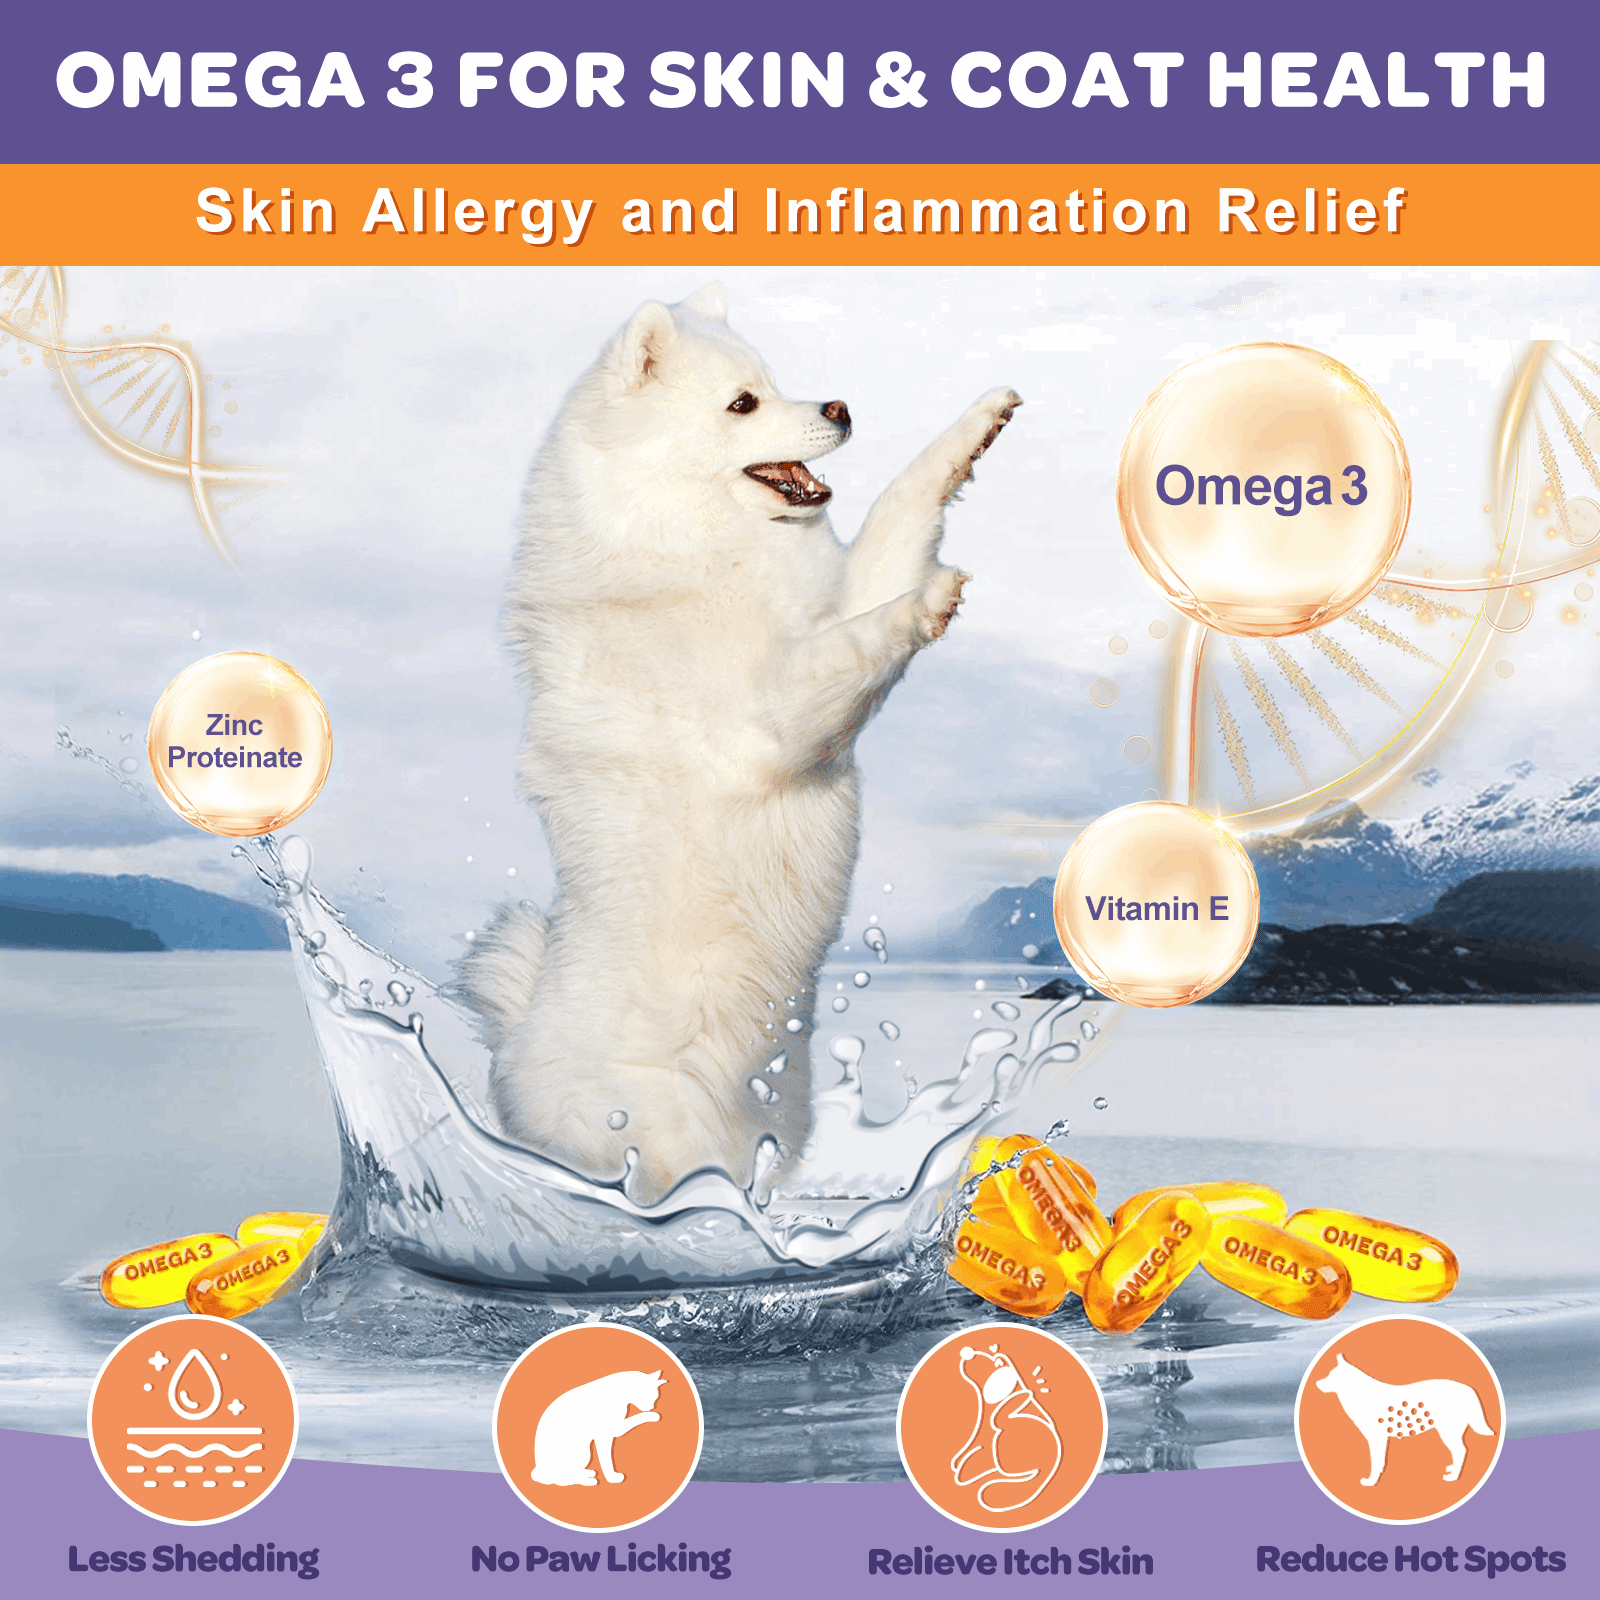 Omega 3 is good for your dog's skin and coat health